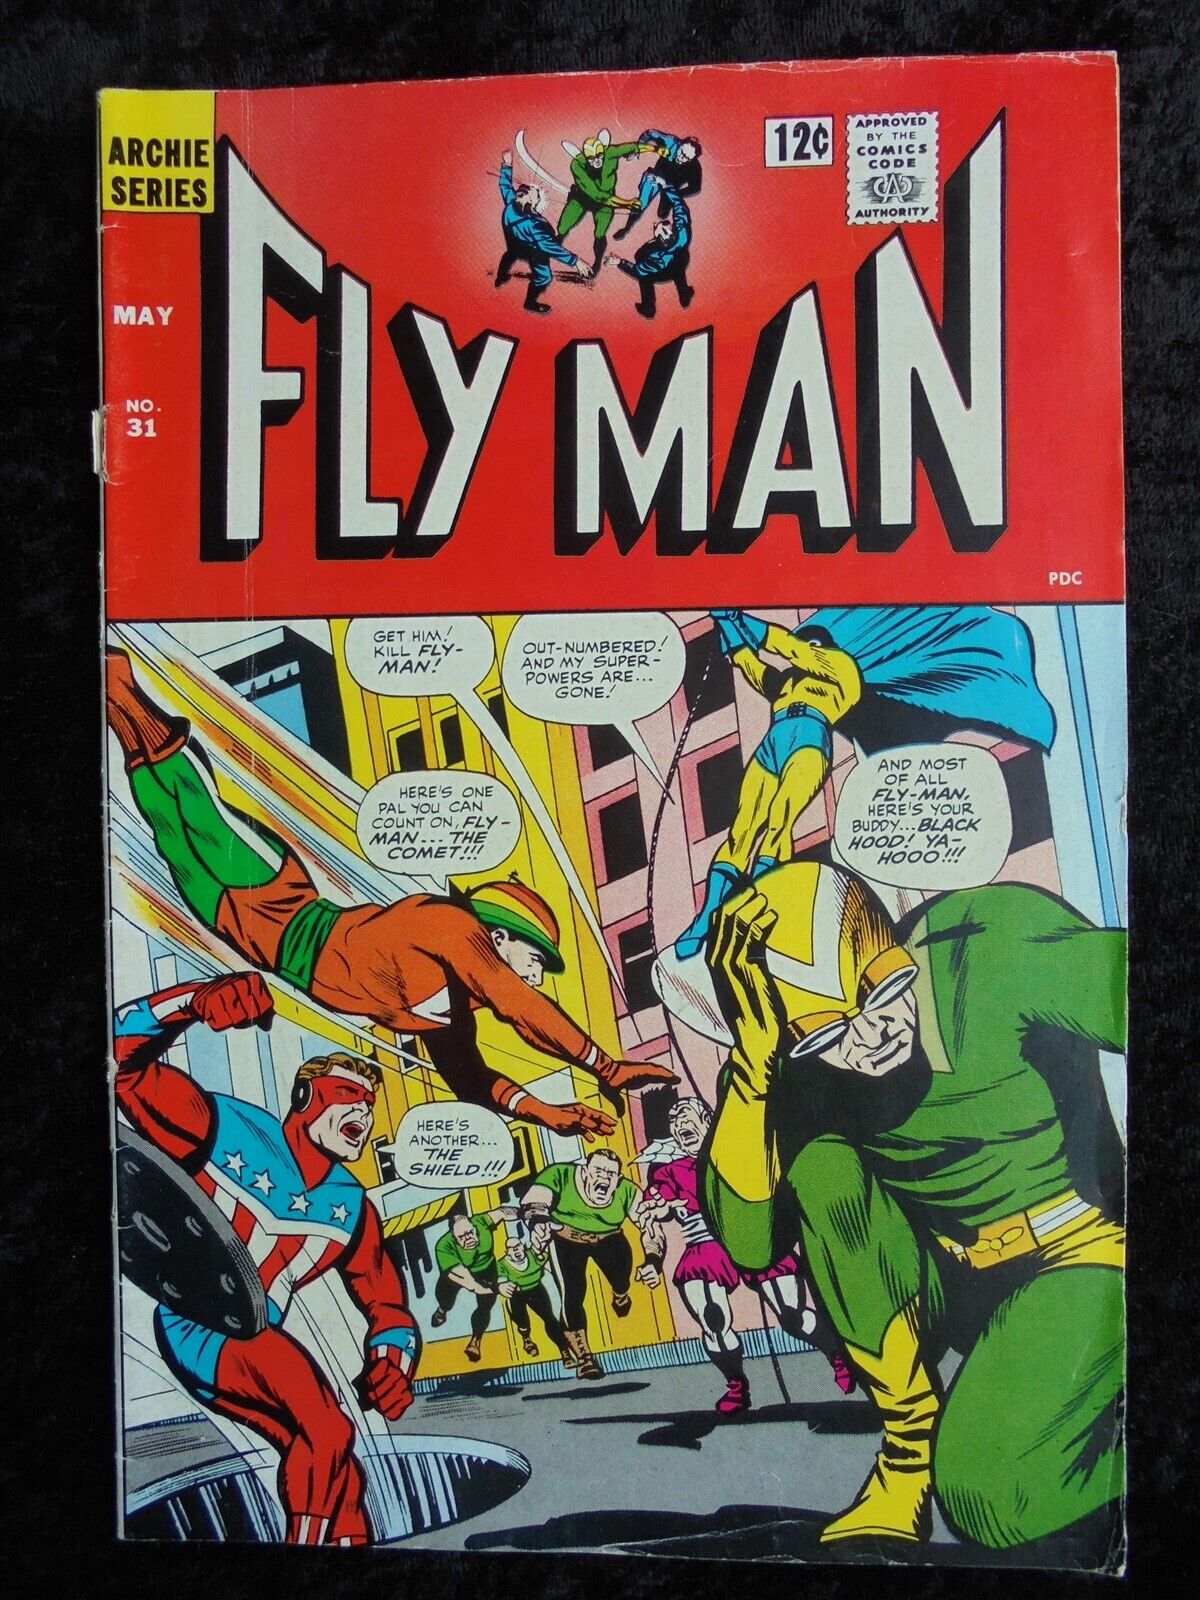 FLY MAN #31 1965 MIGHTY COMICS GROUP COMIC BOOK